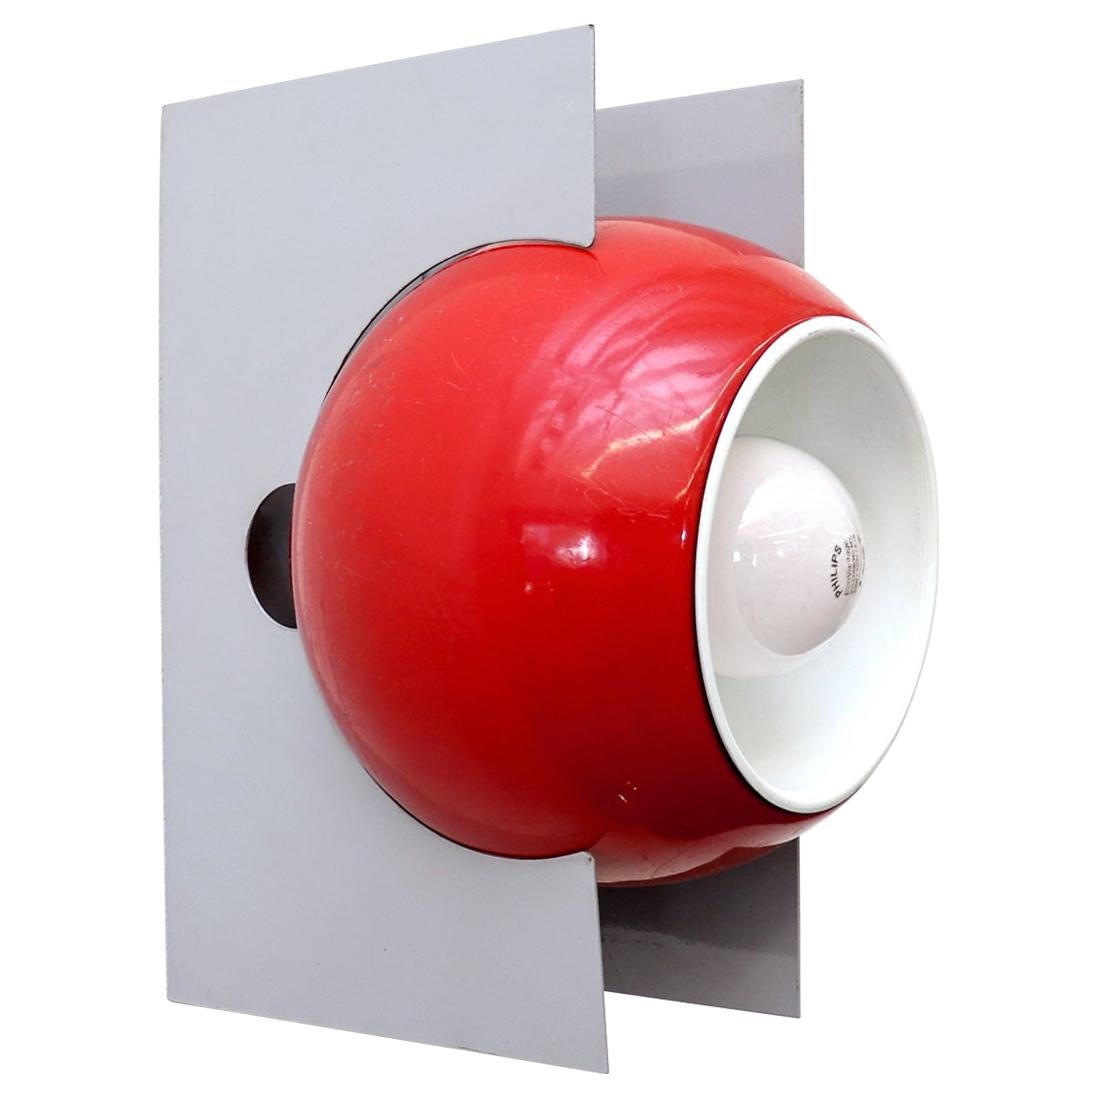 Bauhaus Inspired Mid-Century Red and Gray Wall Mount Globe Lamp